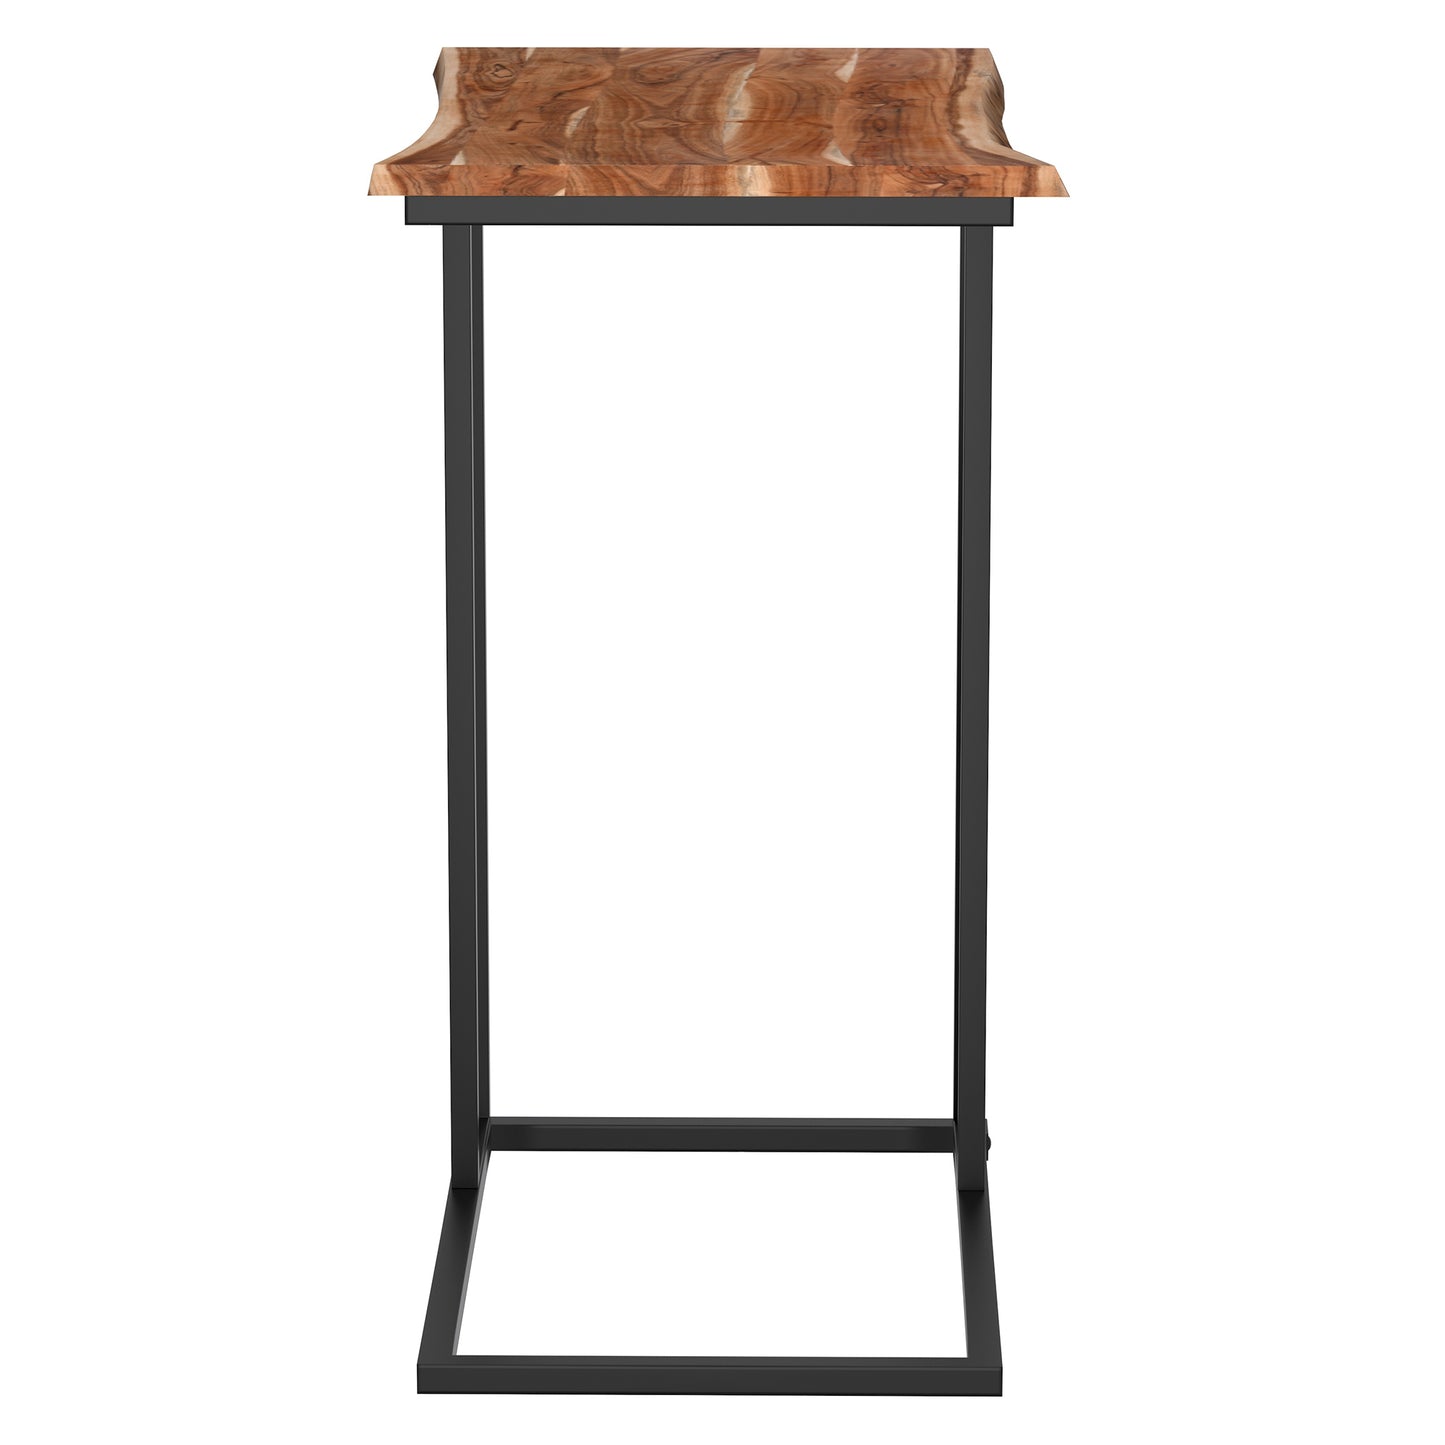 (JIVIN BROWN) - WOOD ACCENT TABLE